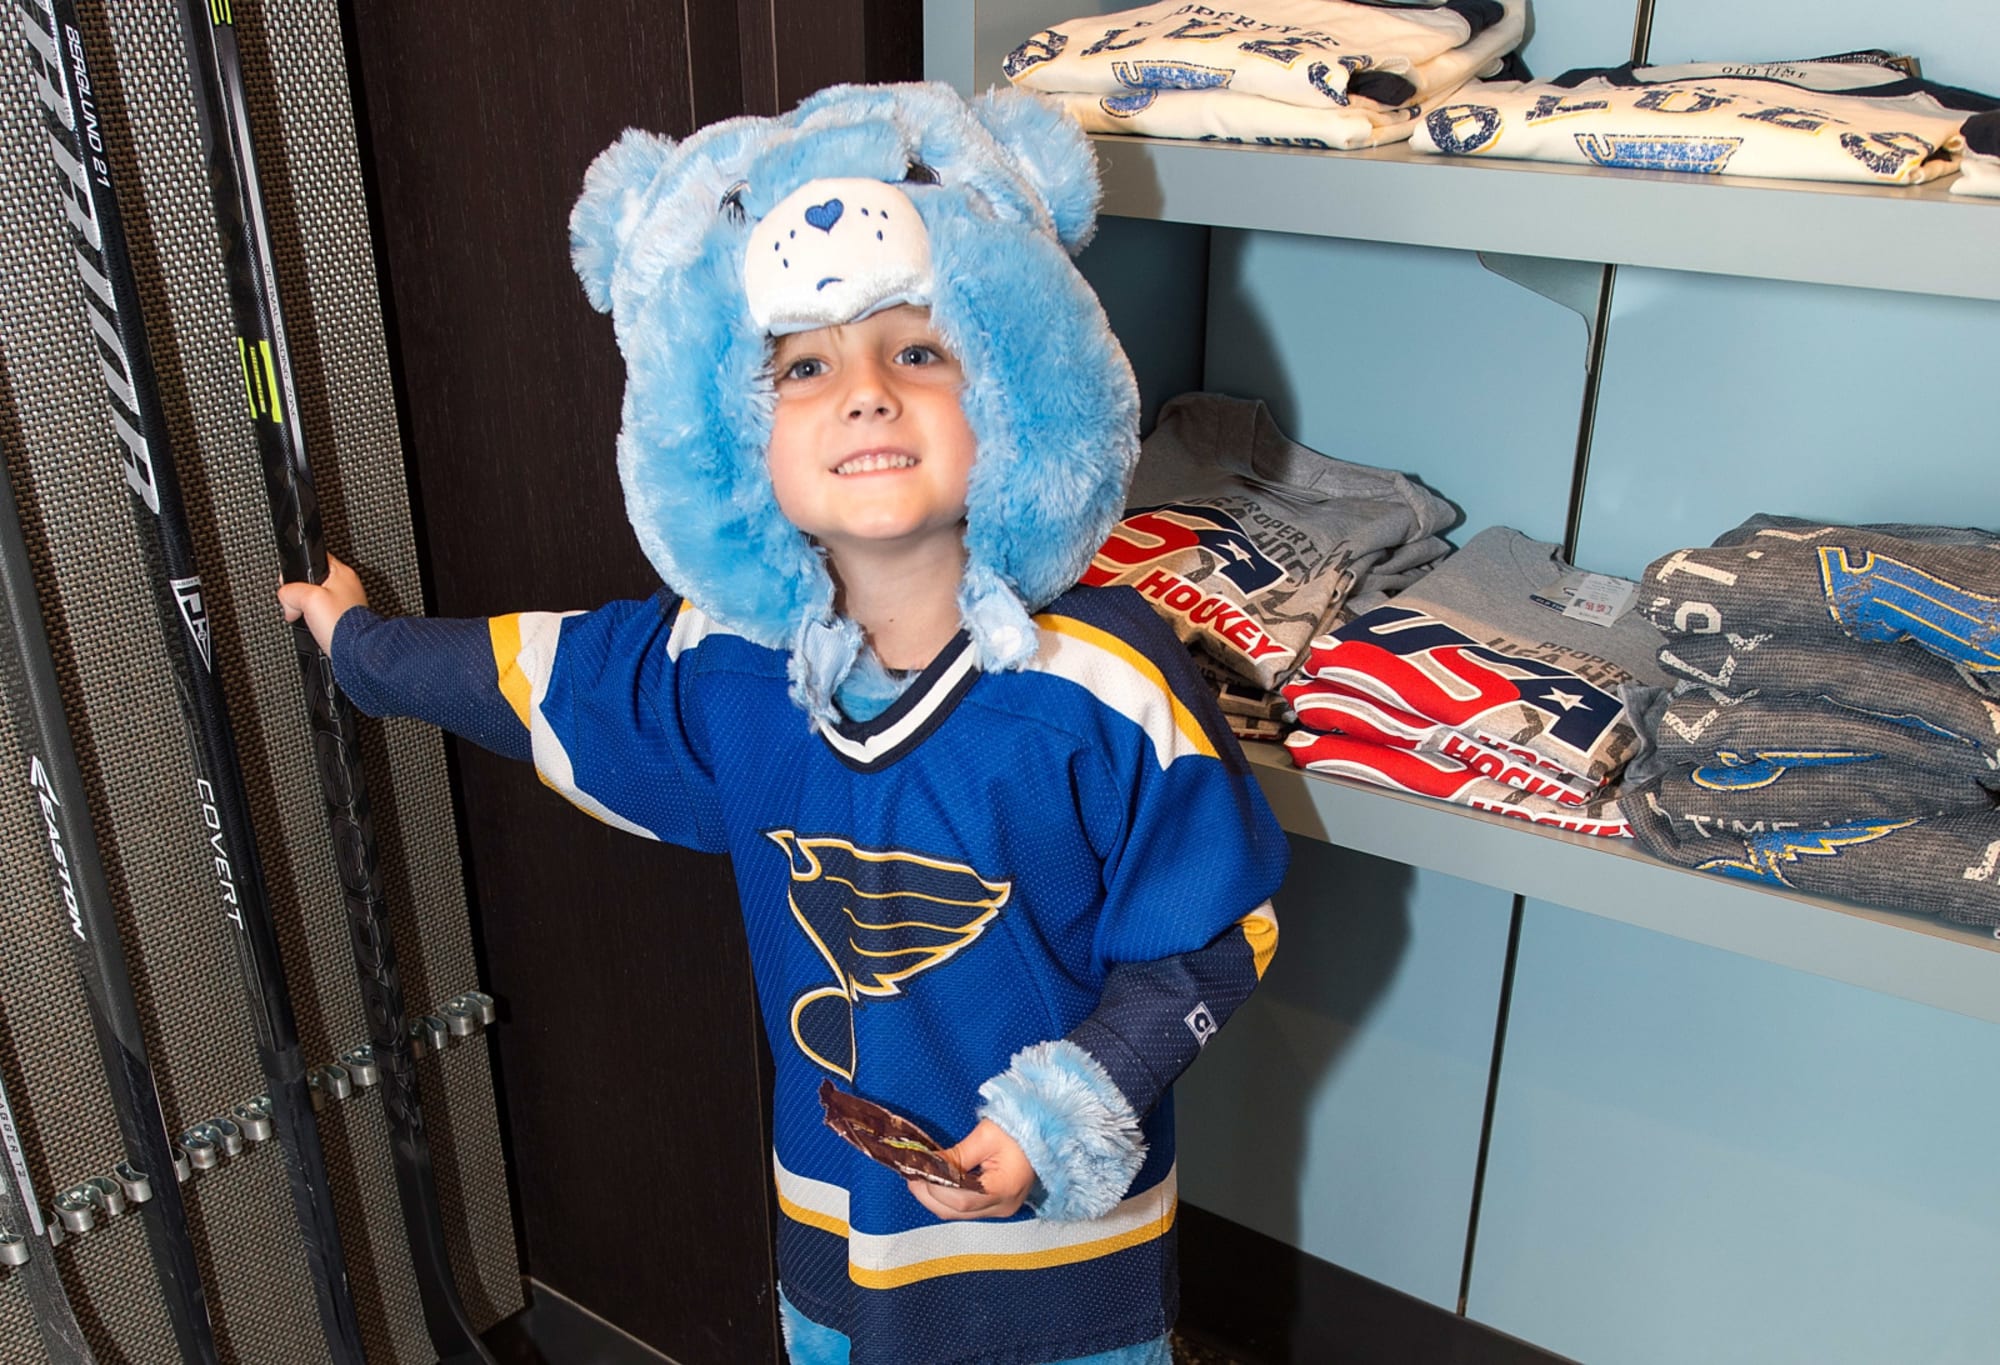 St. Louis Blues promotional giveaways and theme nights